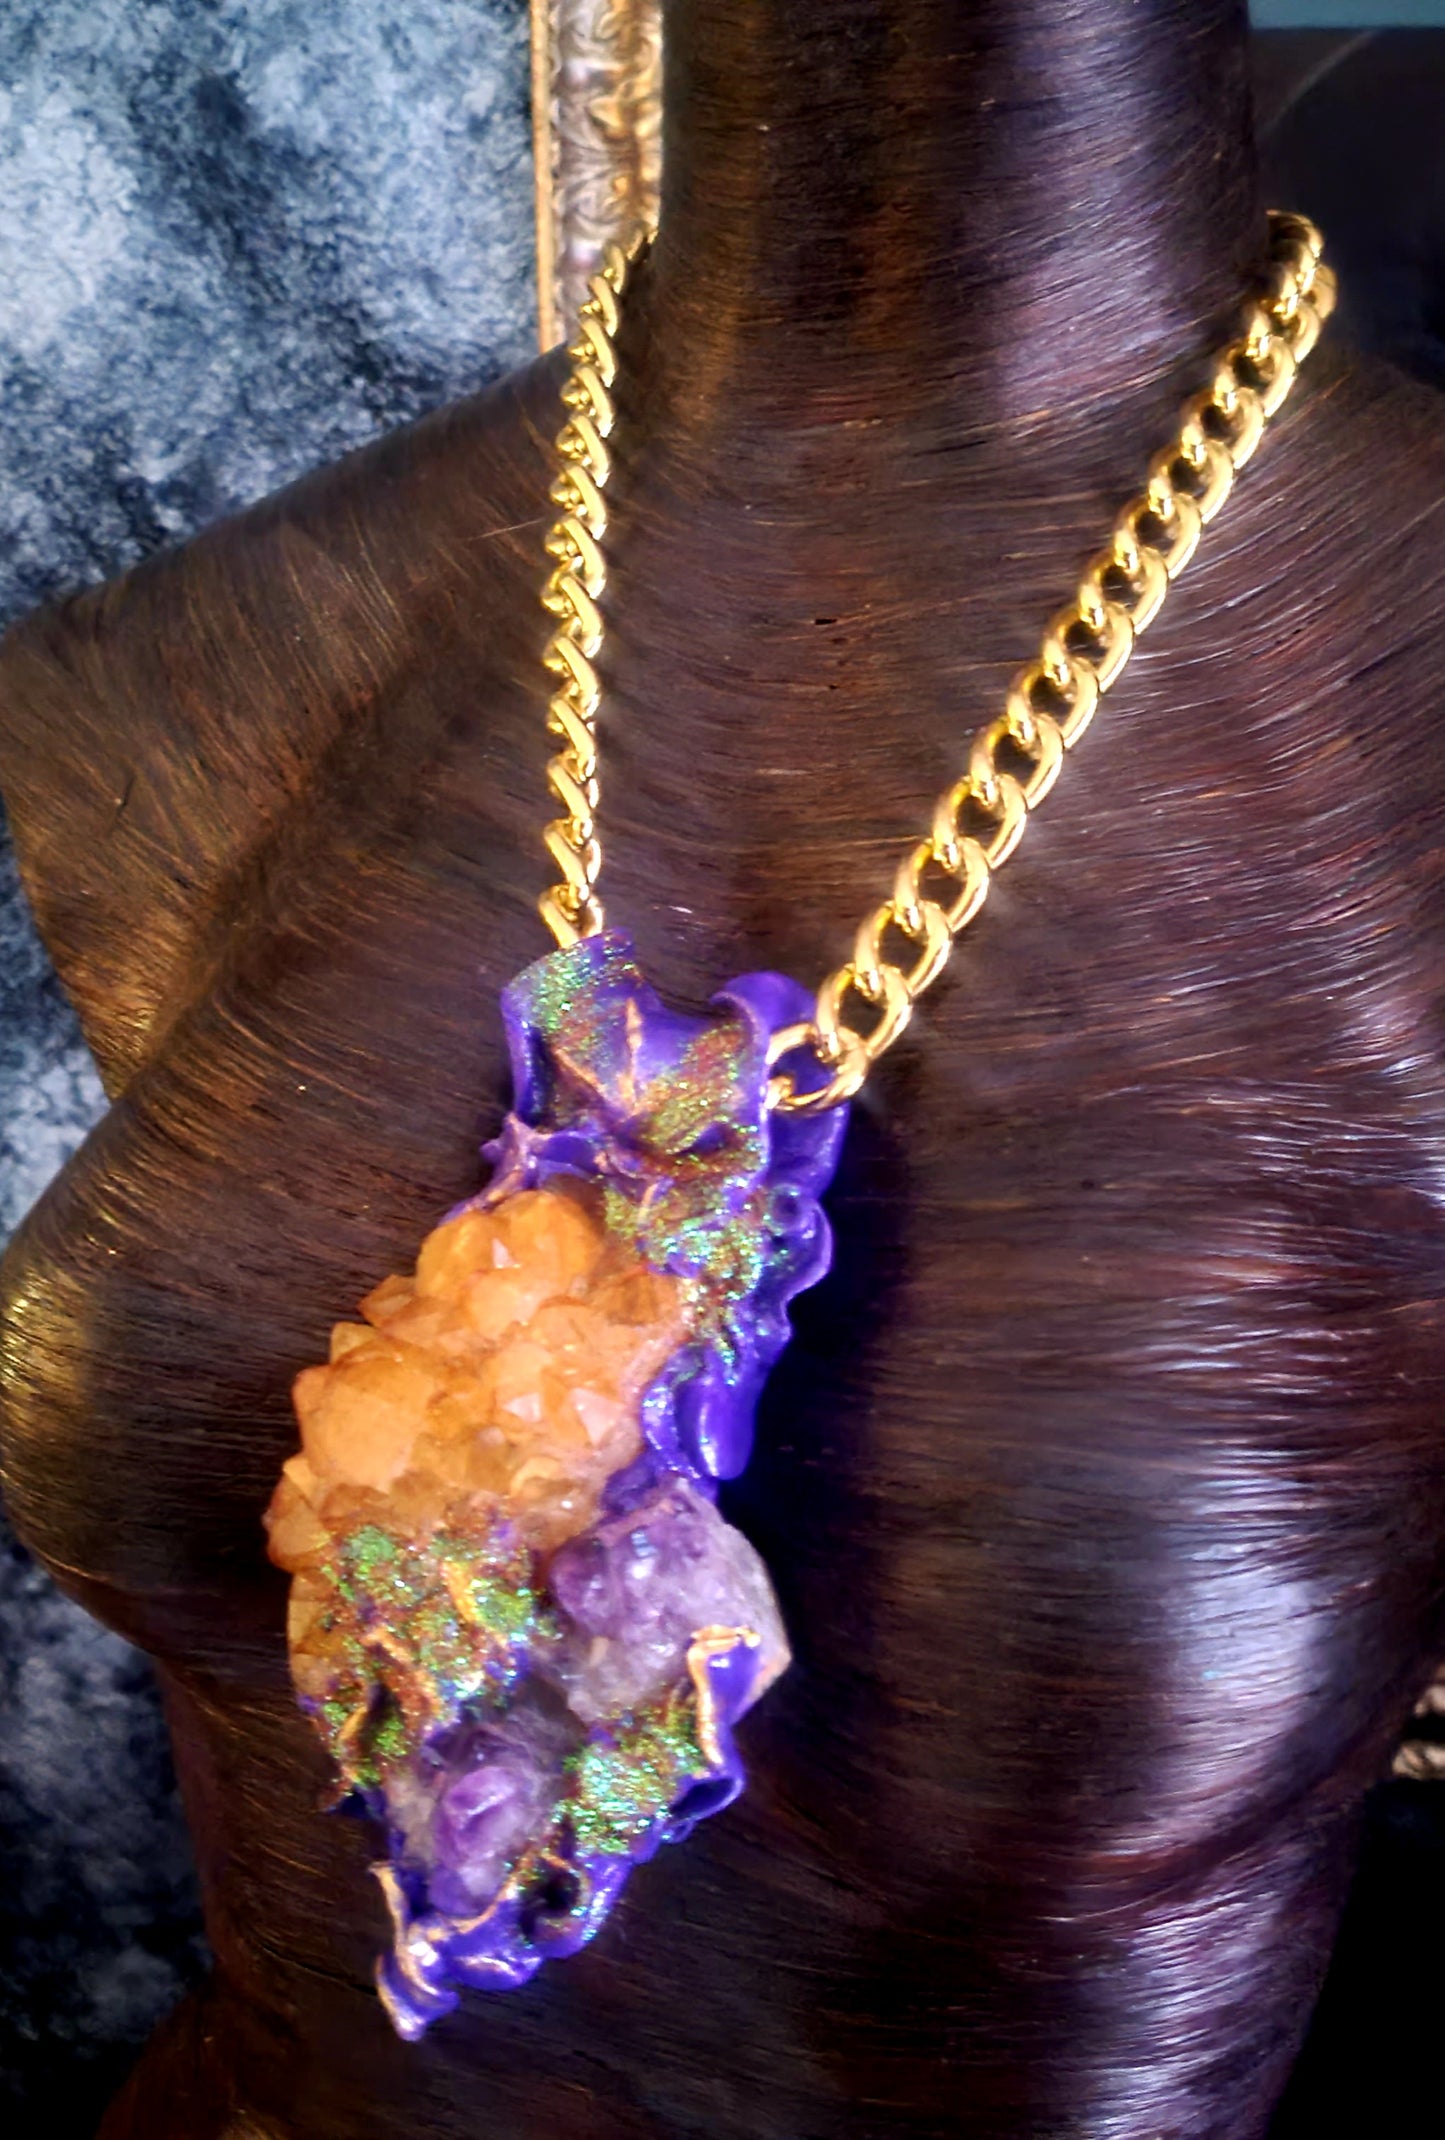 Rough Amethyst & Citrine Sculpted Statement Pendant, Purple and Orange Crystal Gemstone Amulet with Bold Gold Tone Chain